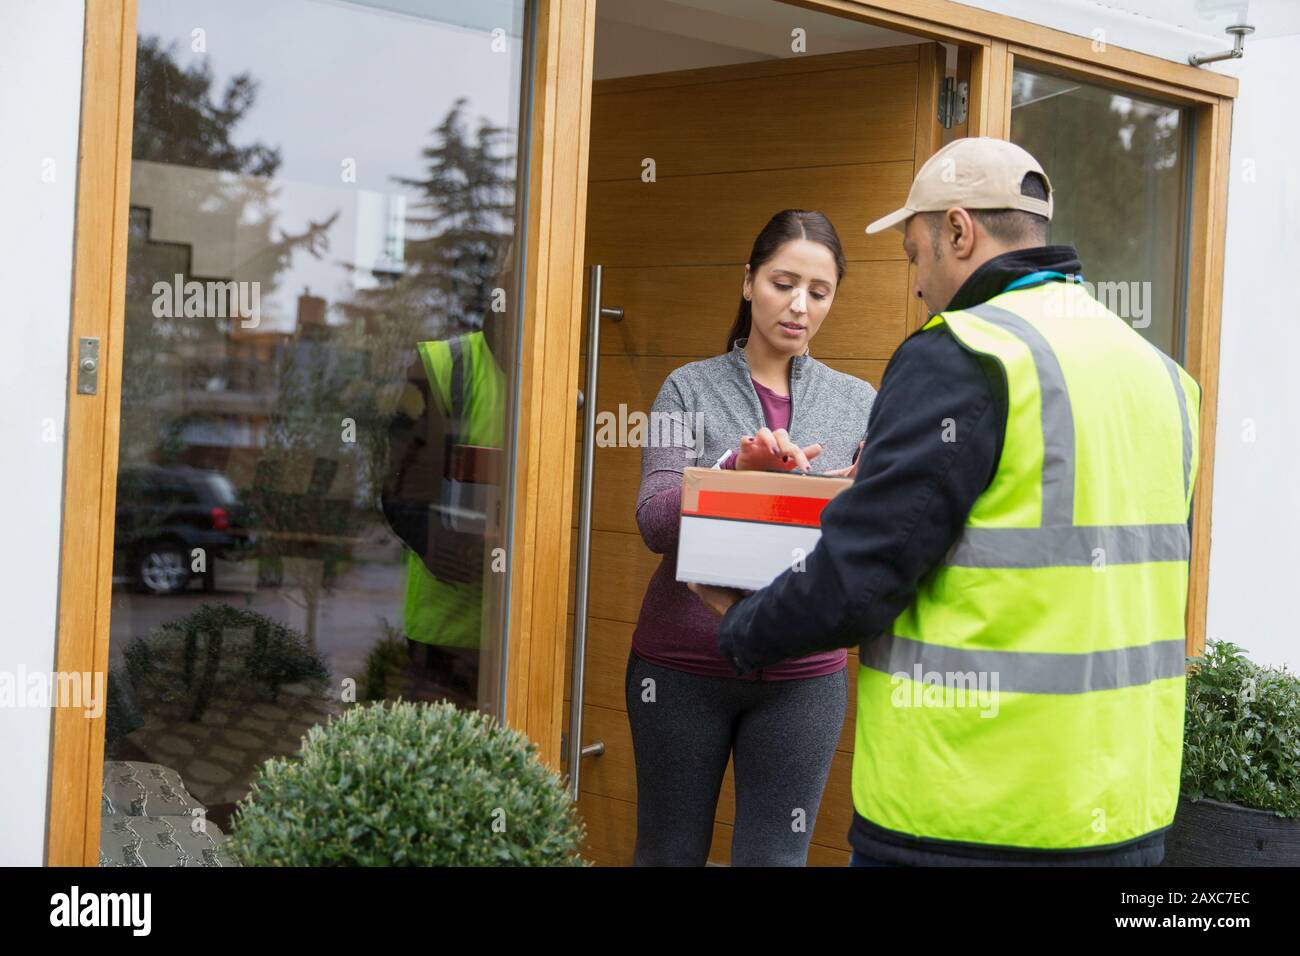 Woman signing for package from deliveryman at front door Stock Photo